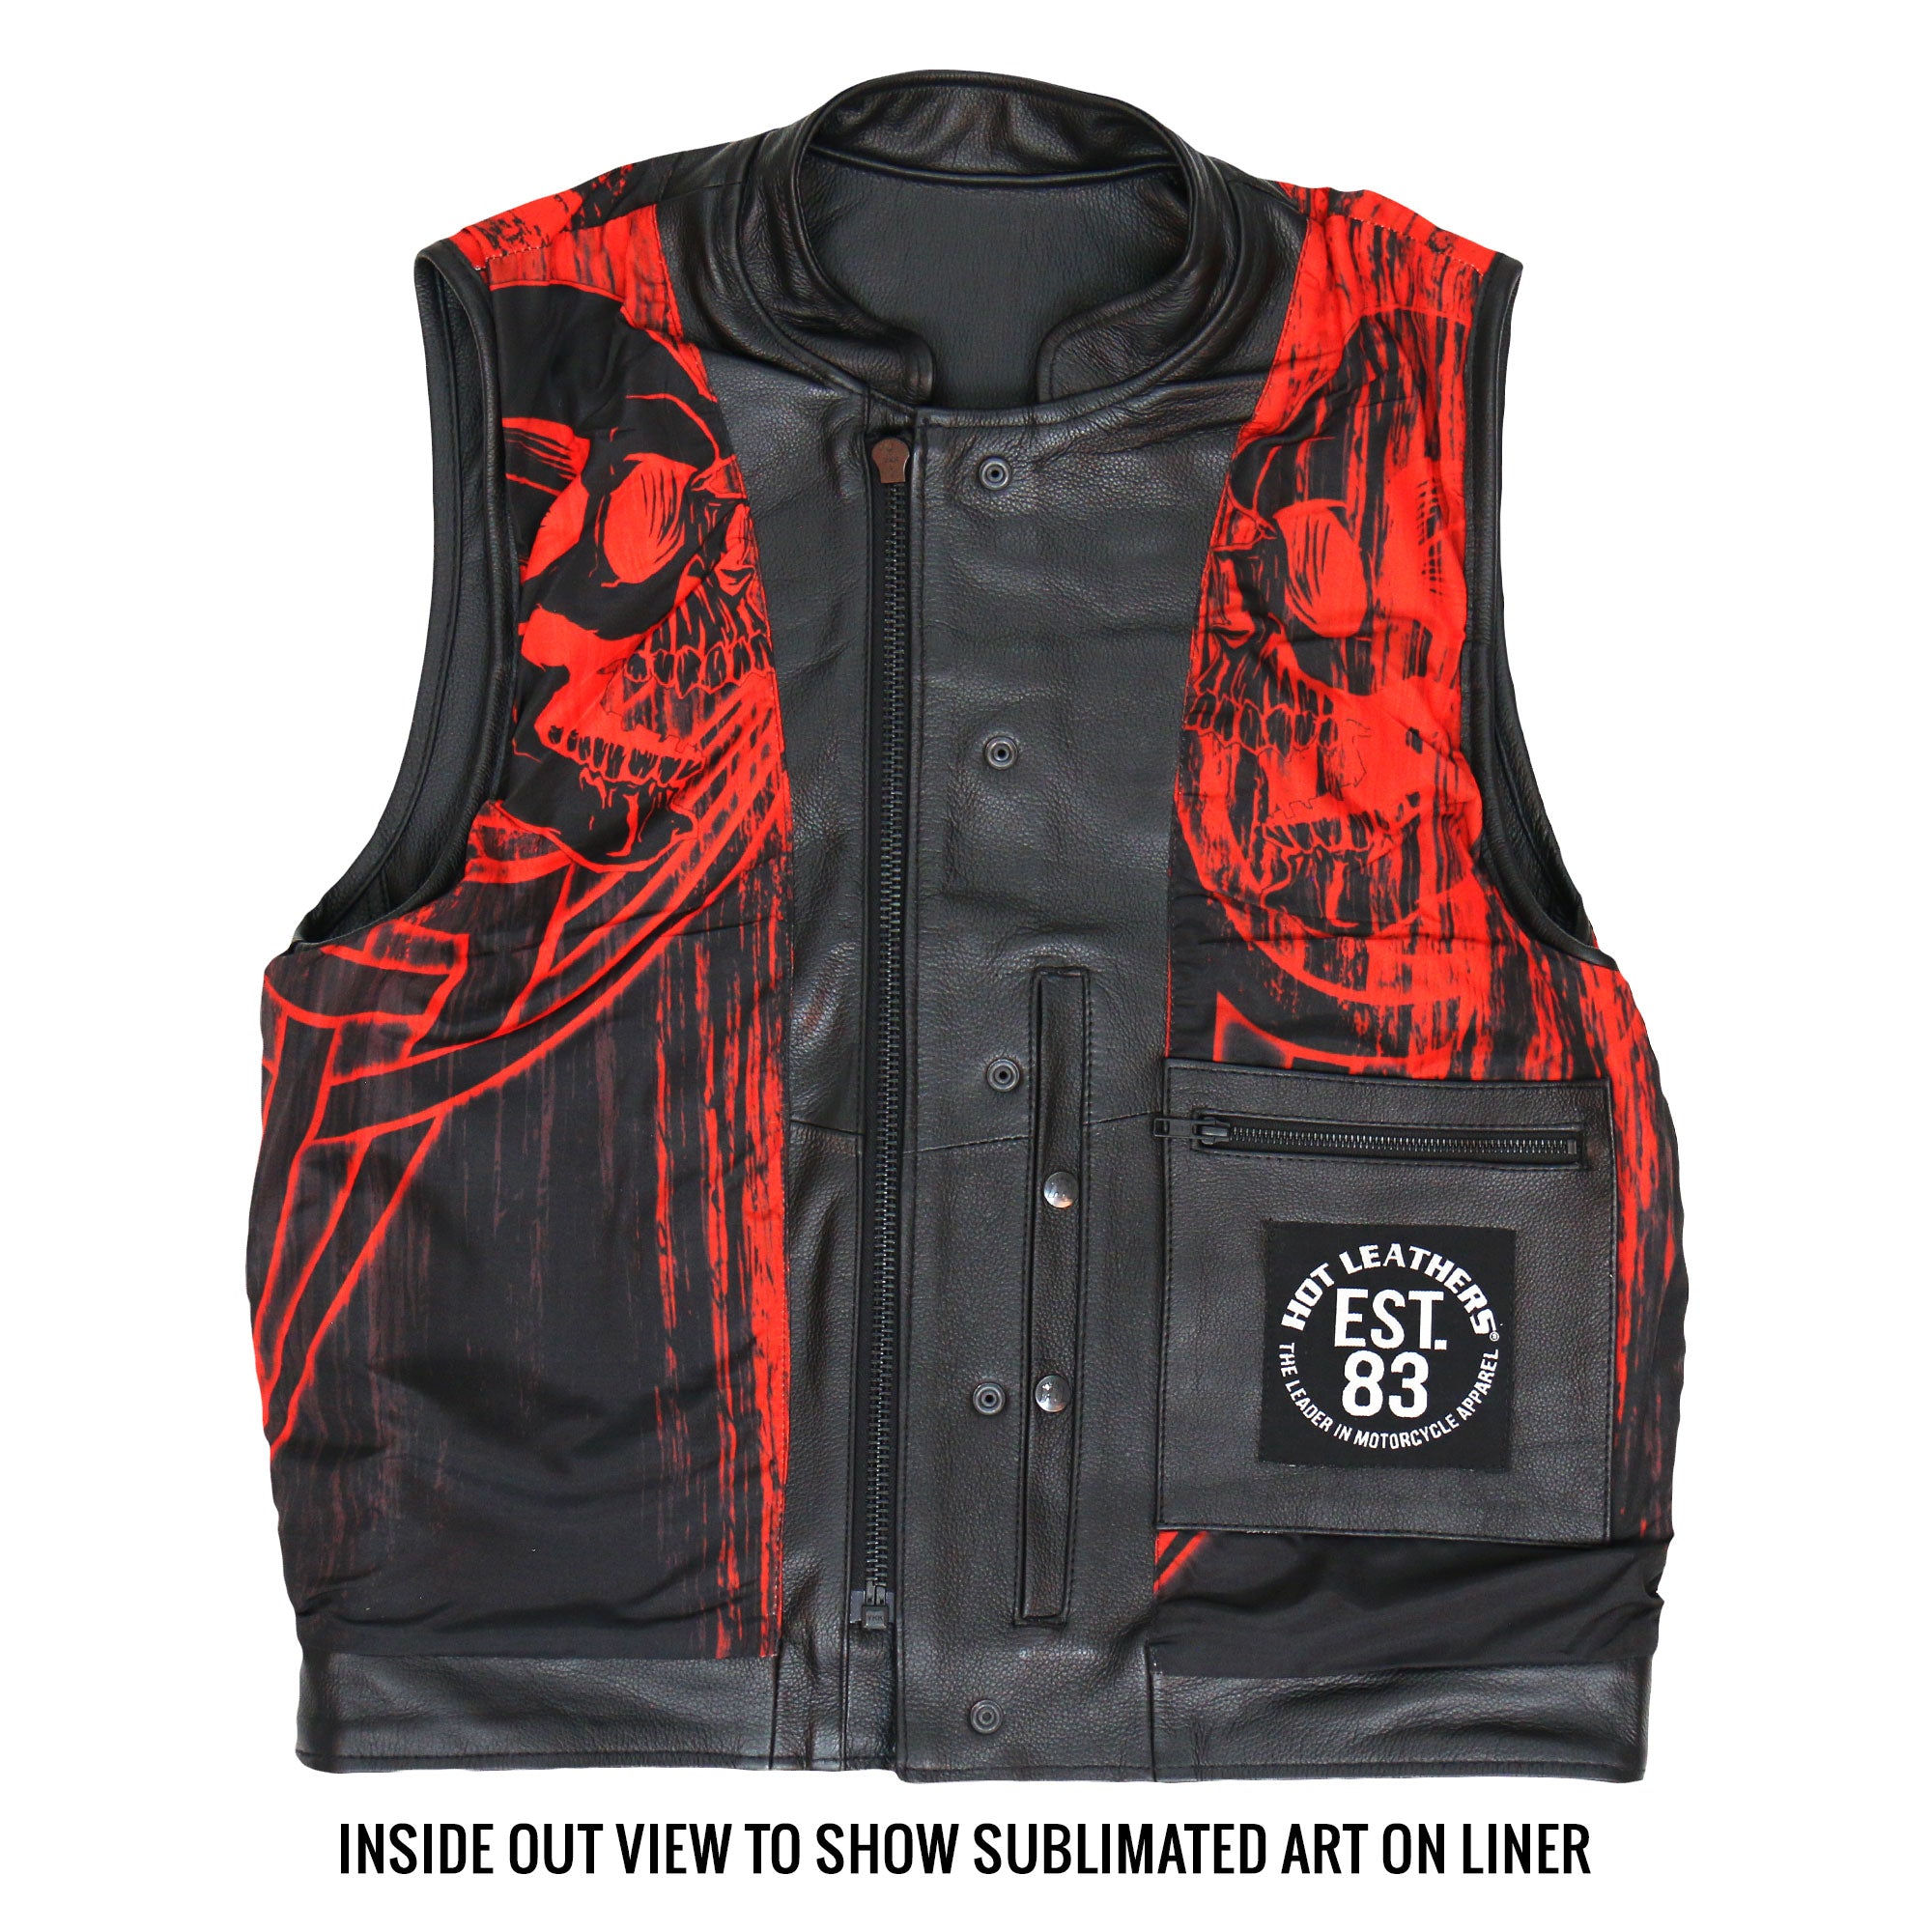 Hot Leathers VSM1055 Men’s Black 'Over The Top Skull' Motorcycle Club Style Conceal and Carry Leather Biker Vest